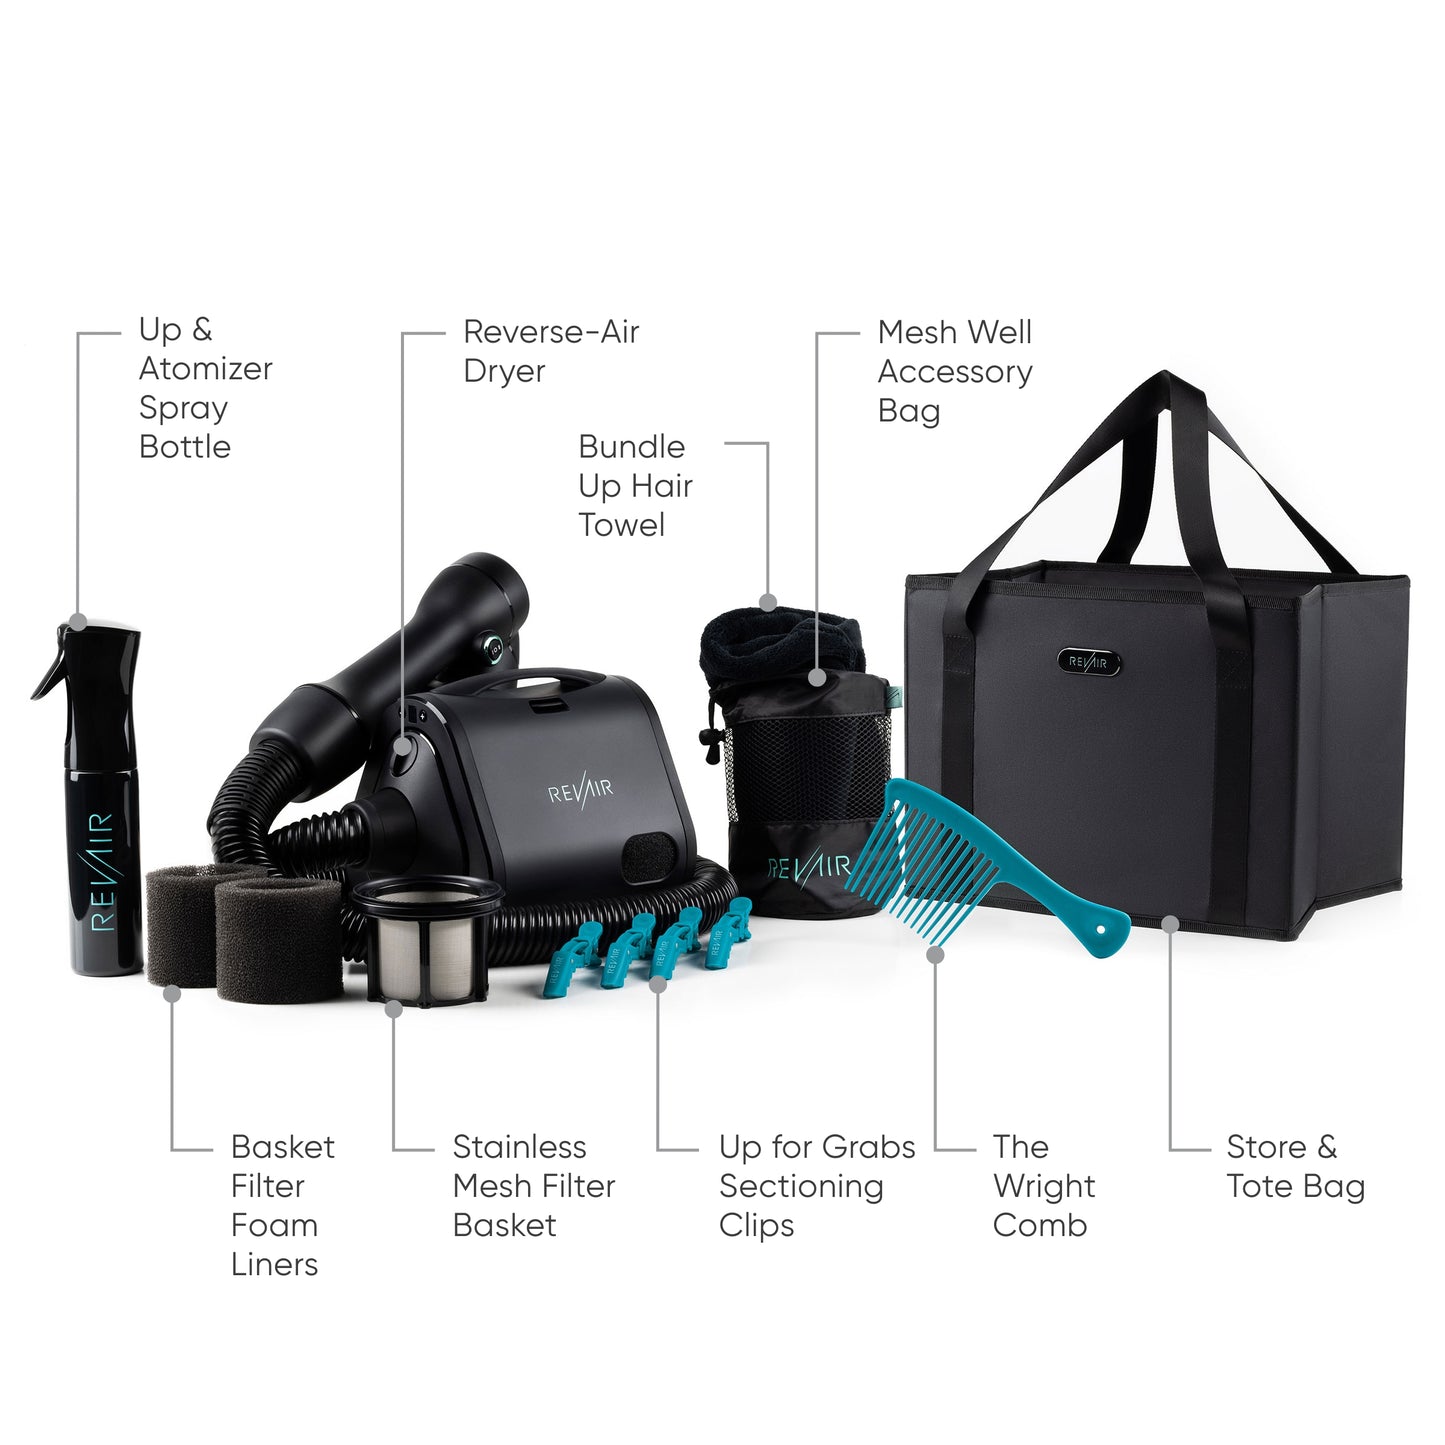 includes: spray bottle, RevAir dryer, hair towel, accessory bag, foam liner, mesh filter, sectioning clips, comb, store & tote bag